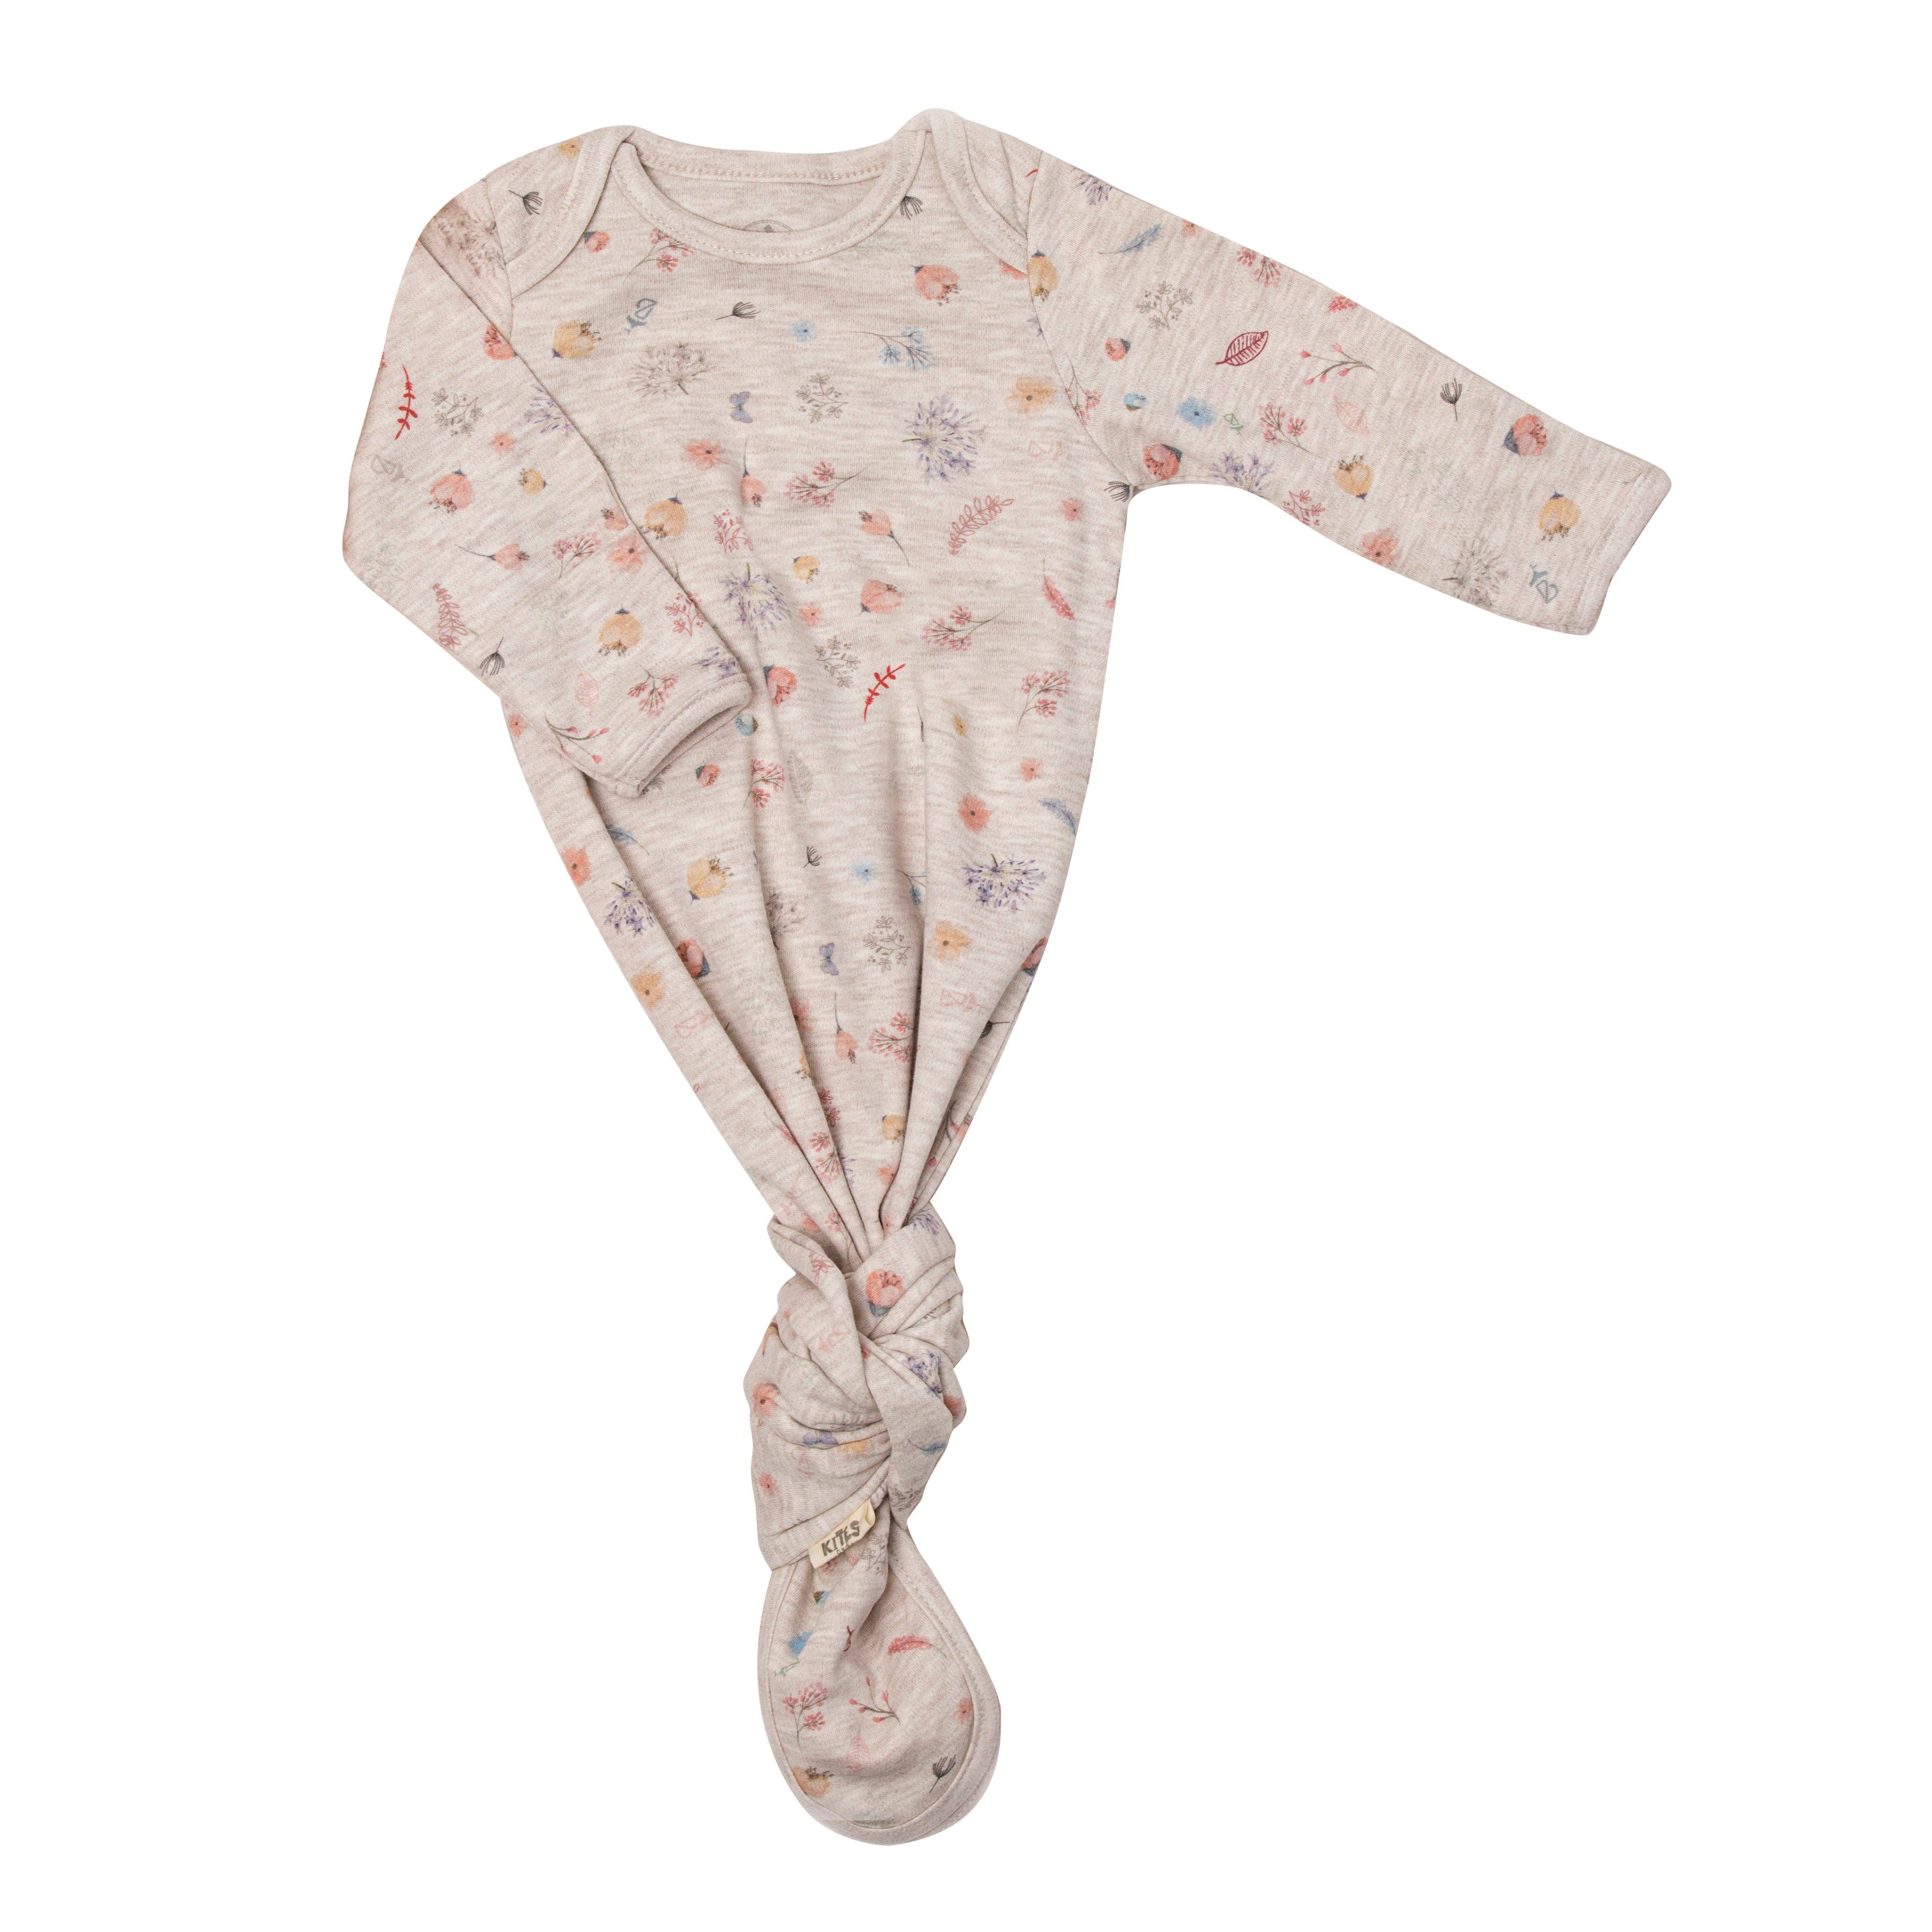 Sleep Gown - Nature Themed Beige: One Size (0-12 Months)